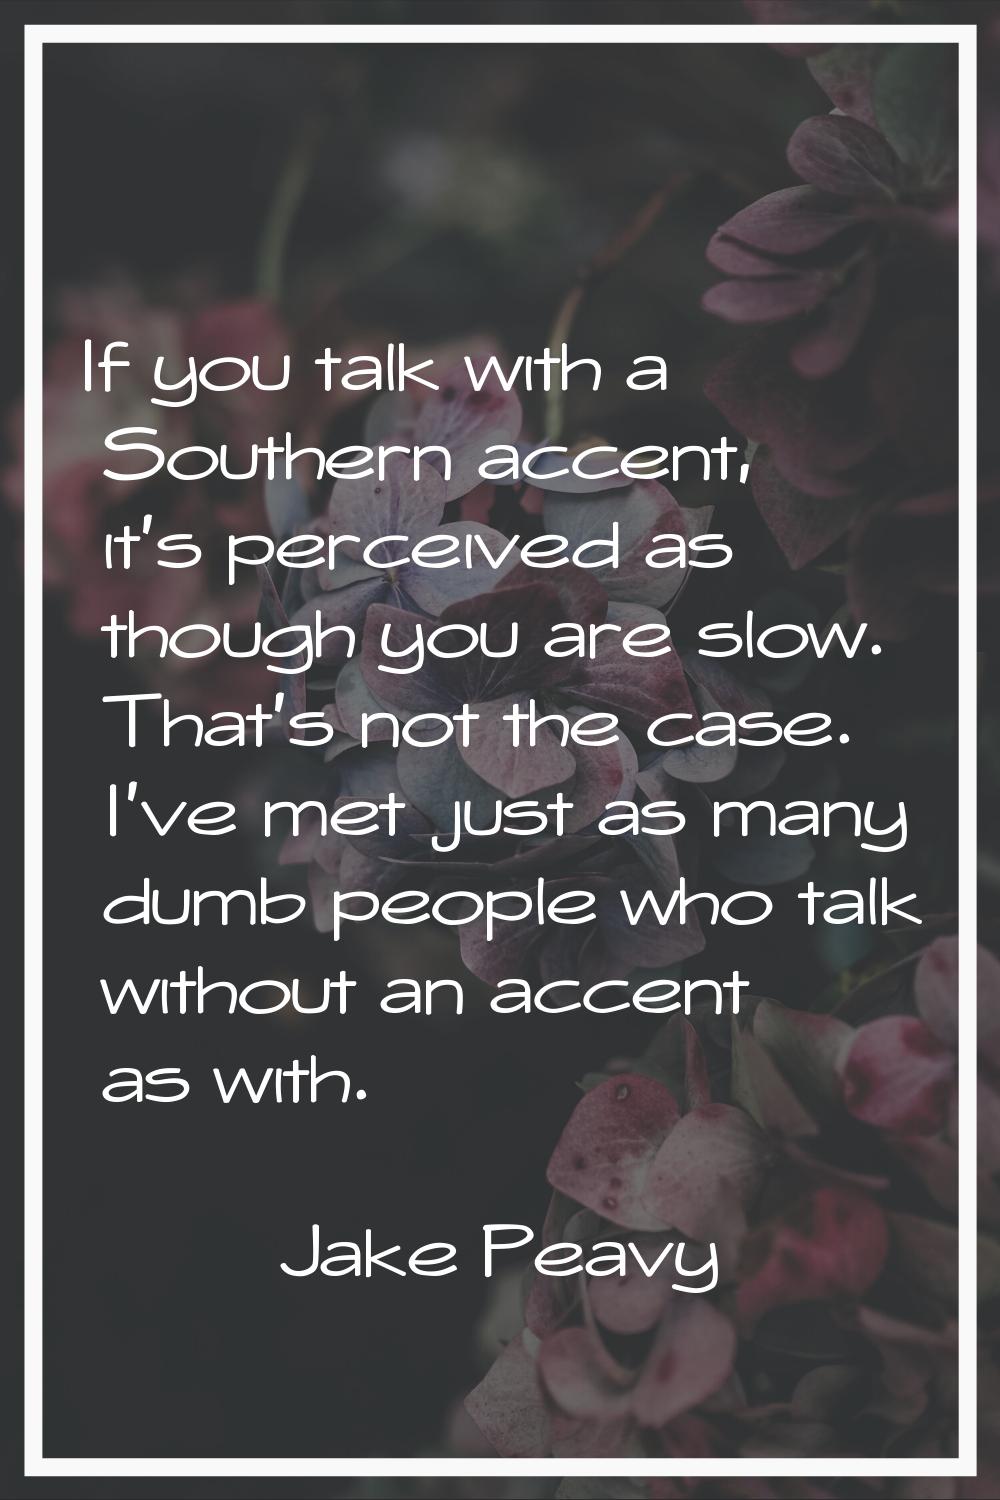 If you talk with a Southern accent, it's perceived as though you are slow. That's not the case. I'v